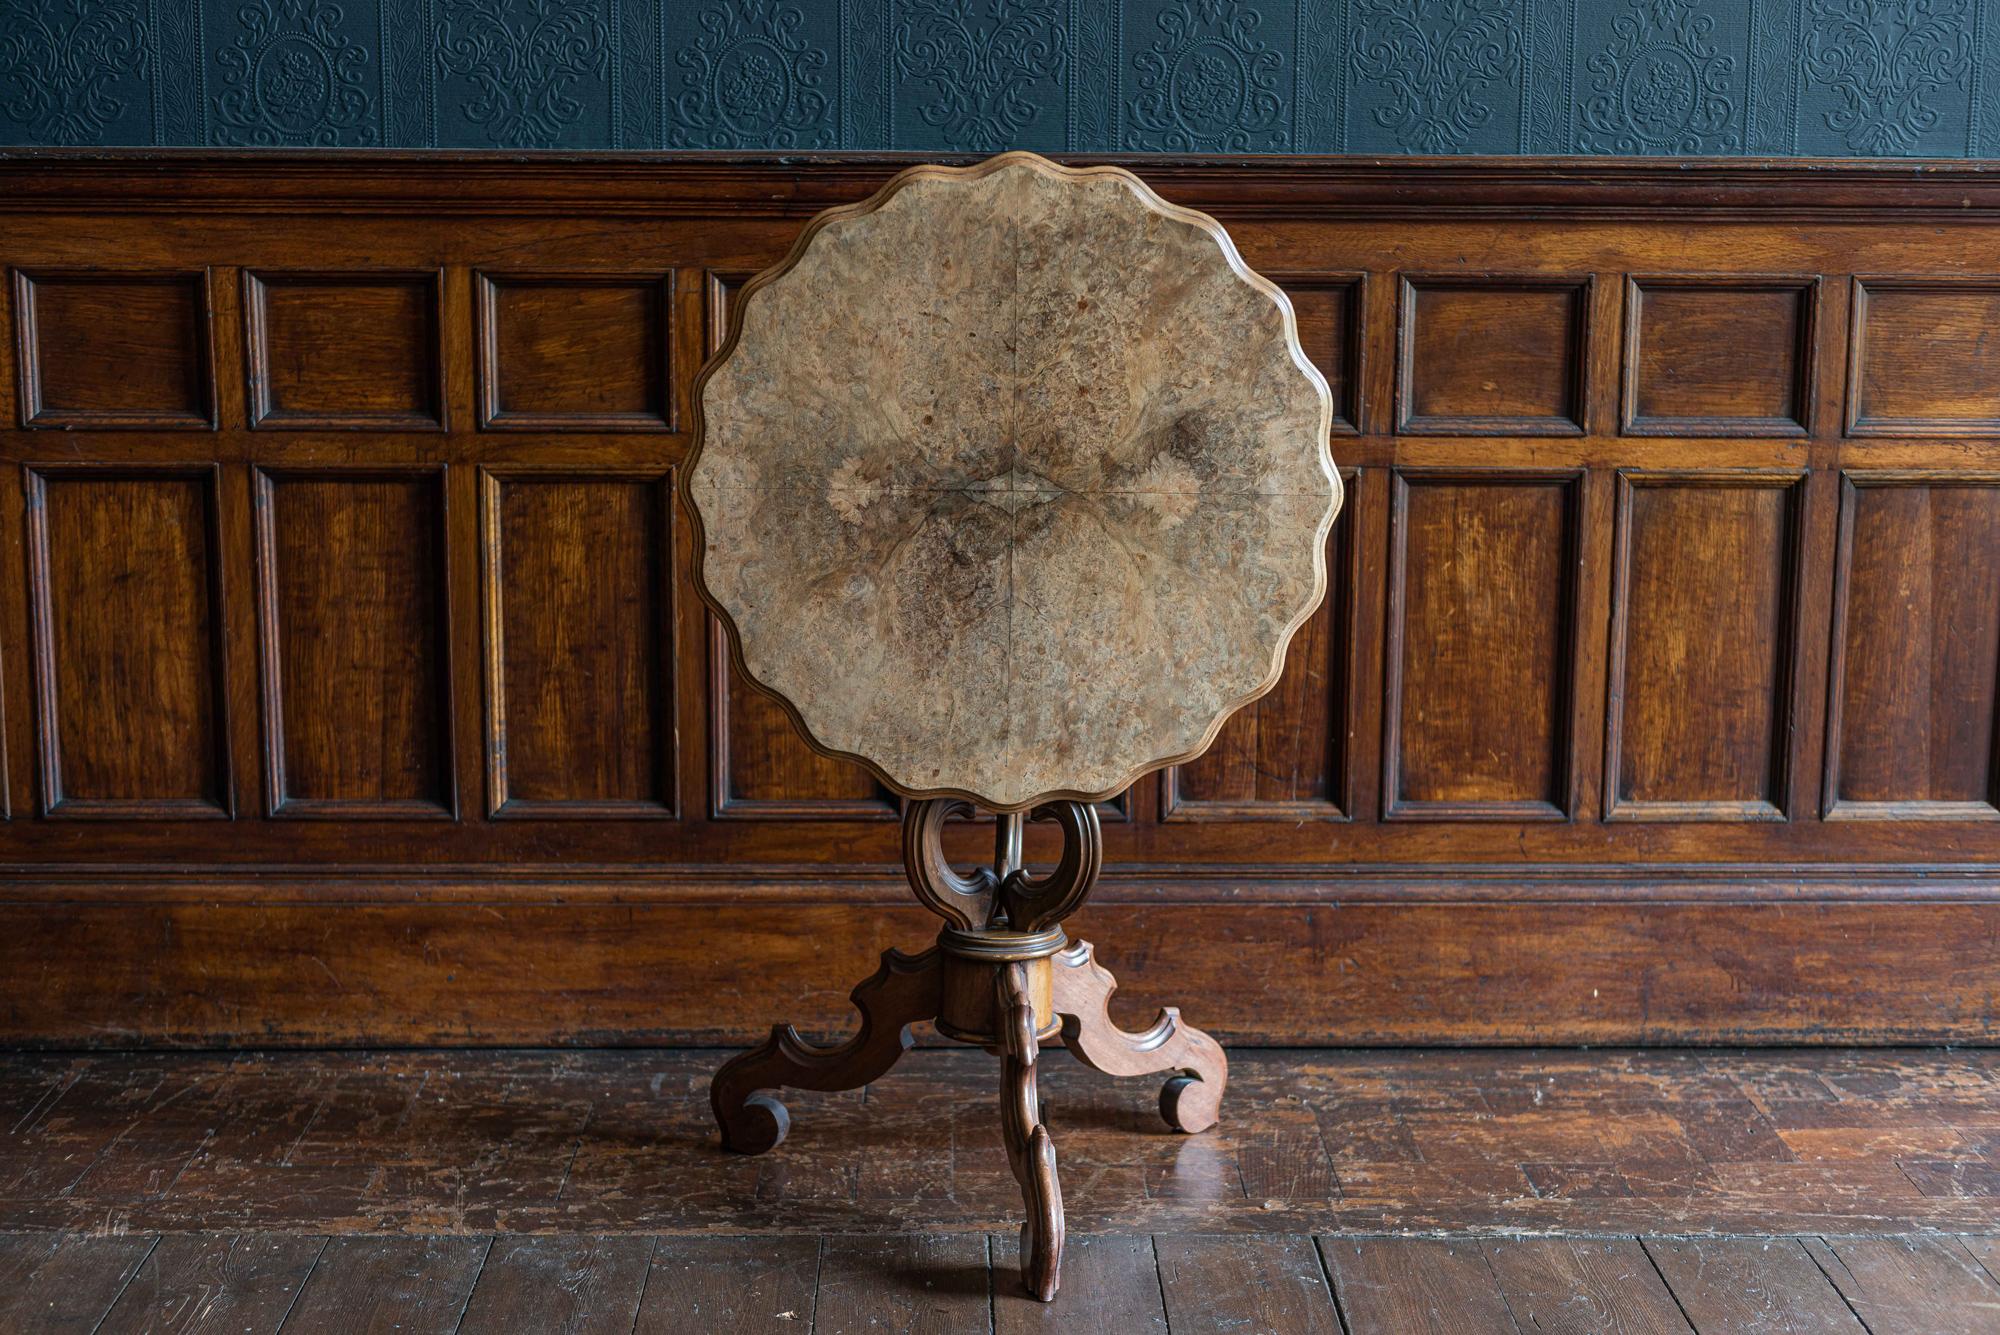 19th century walnut tilt-top centre table
circa 1870.

Burr top with pie crust edge, on out swept scrolling column and base.

Measures: 72 height x 66 diameter cm.